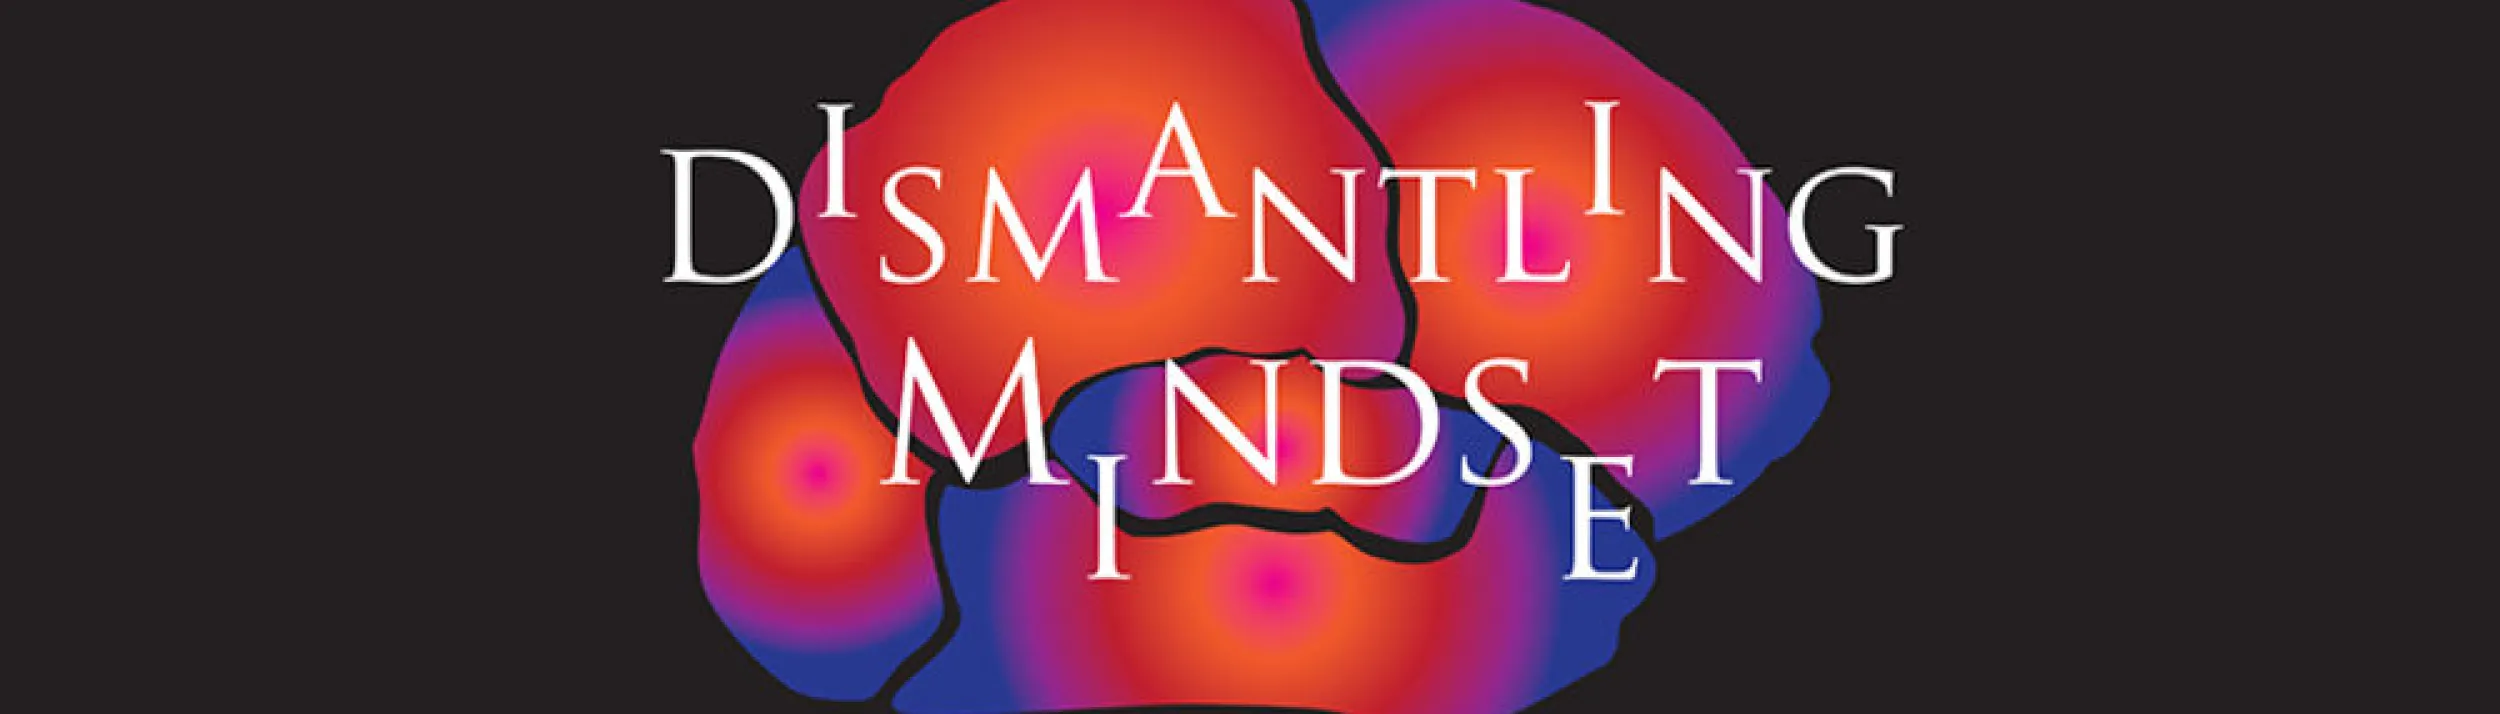 Bright red and blue stylized brain on a black background with text reading "Dismantling Mindset"